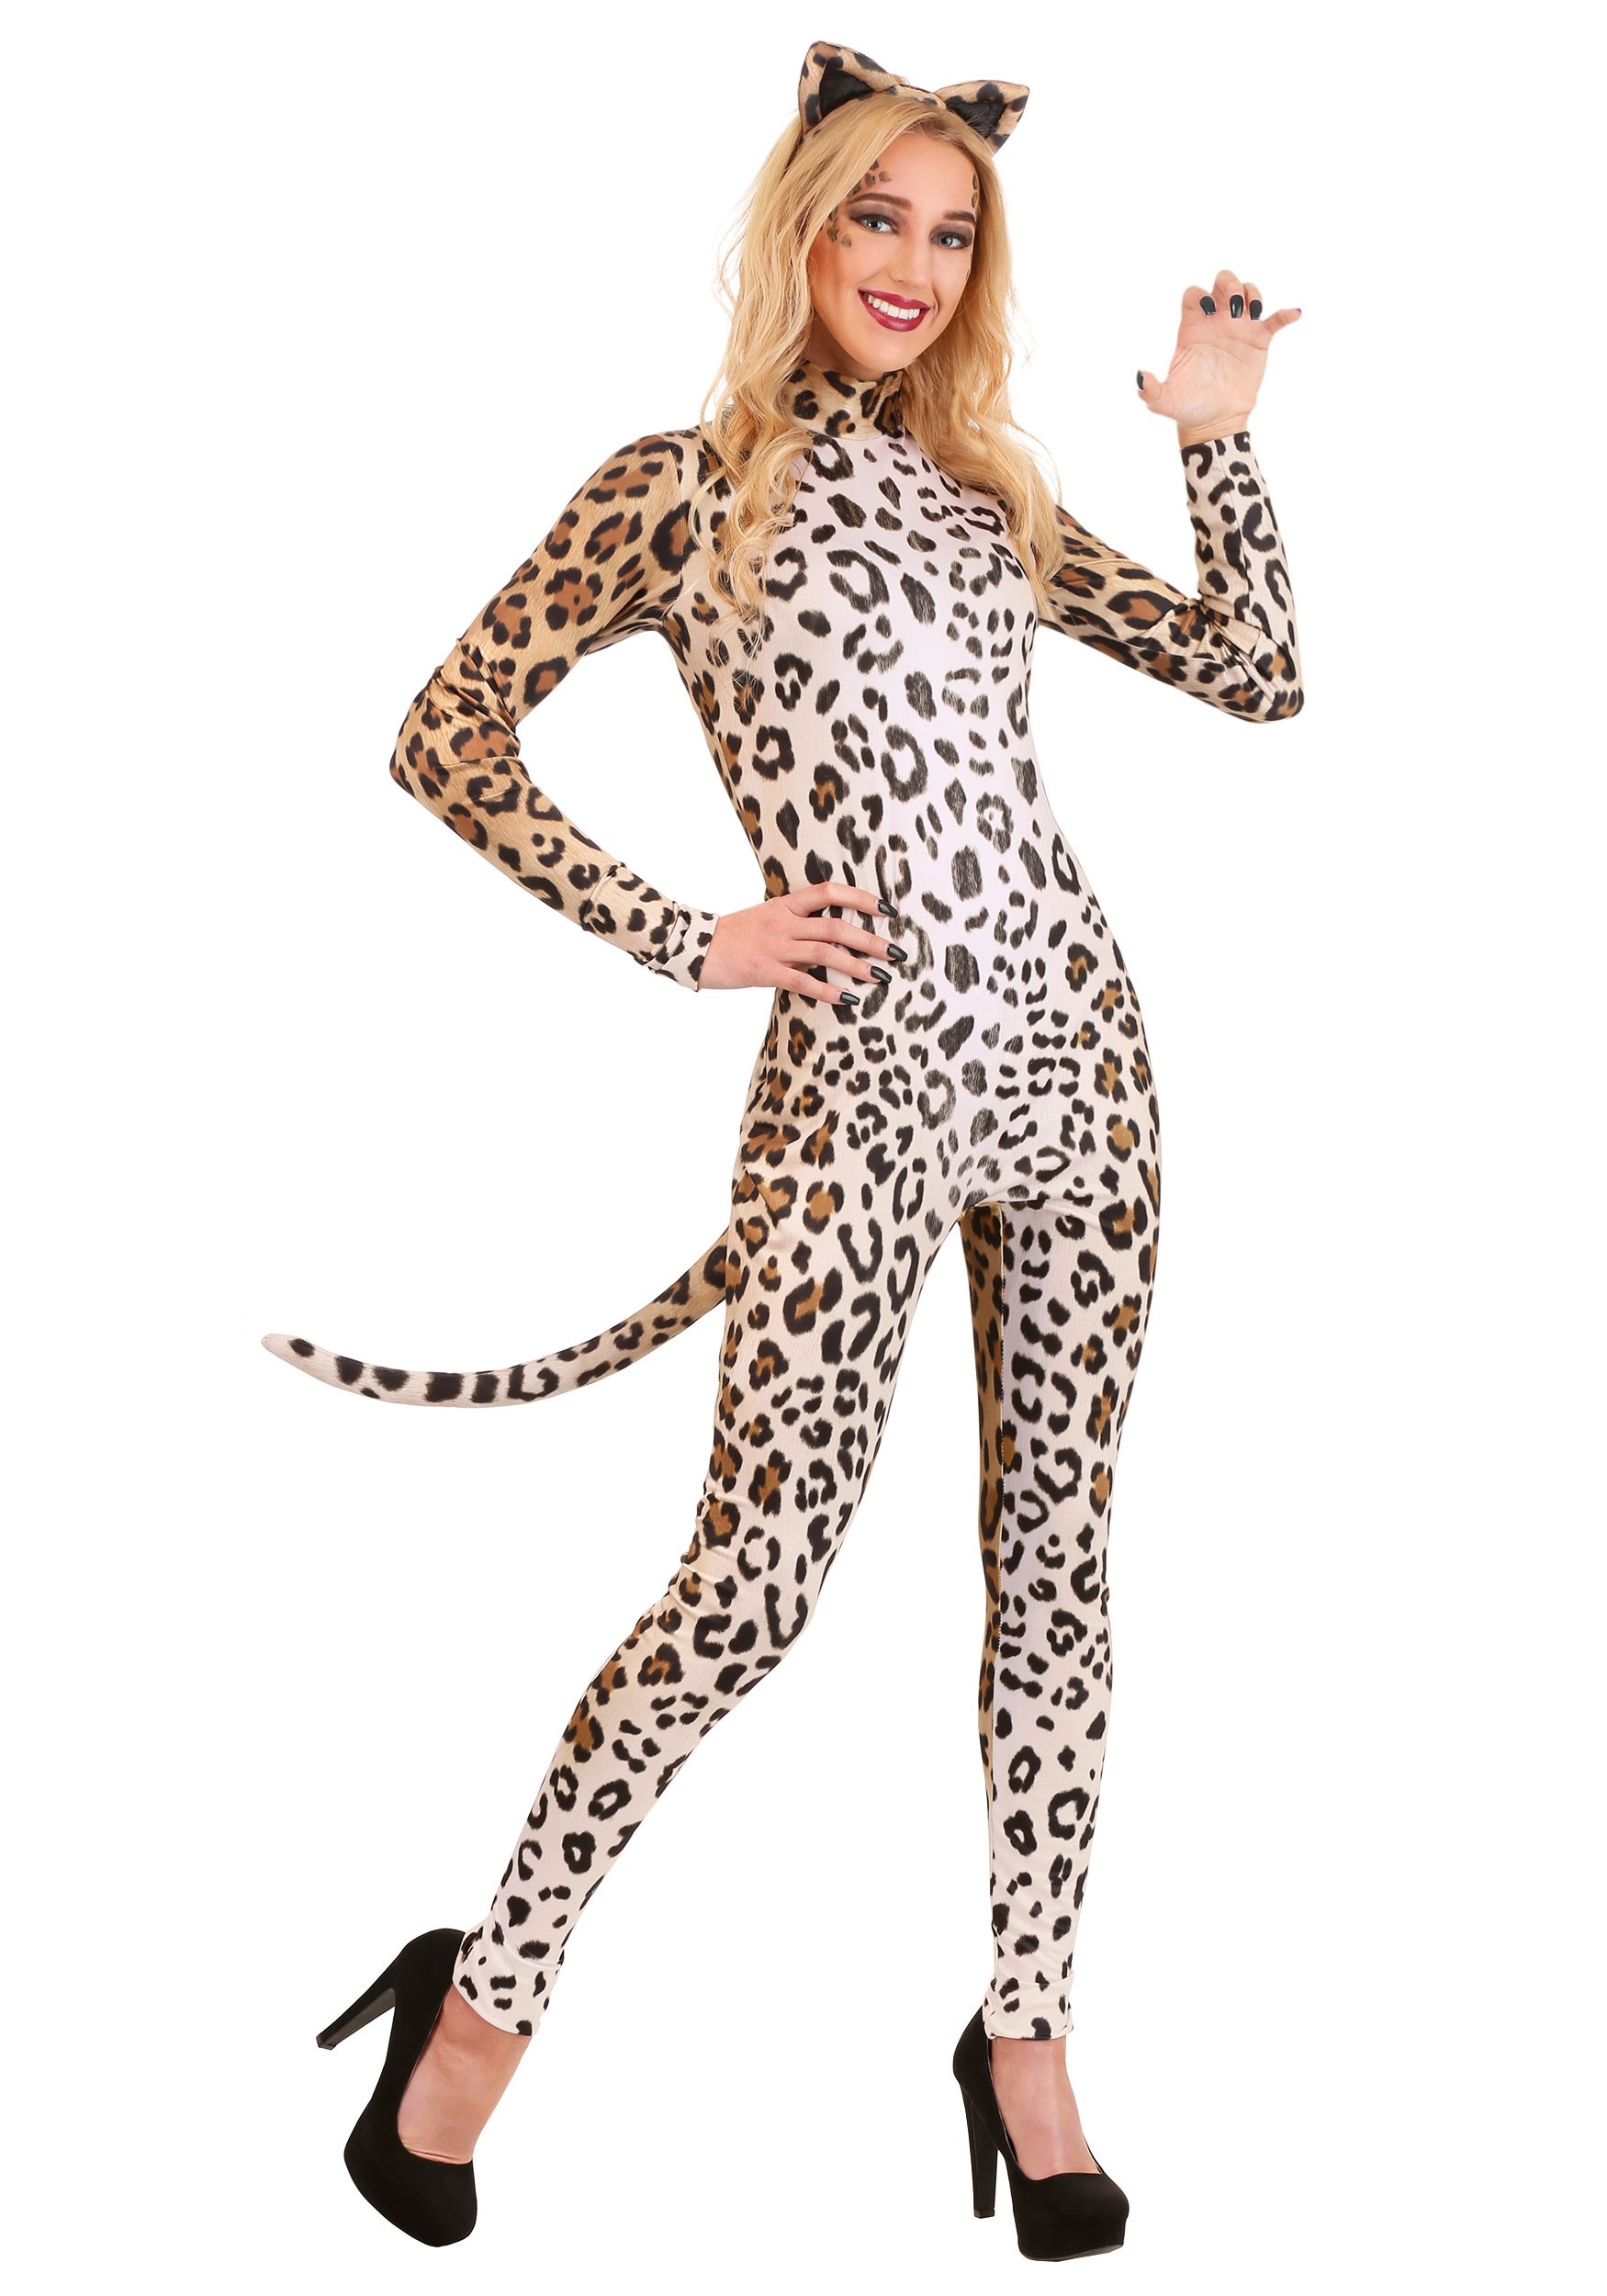 https://images.halloweencostumes.ca/products/45353/1-1/womens-leopard-catsuit1.jpg